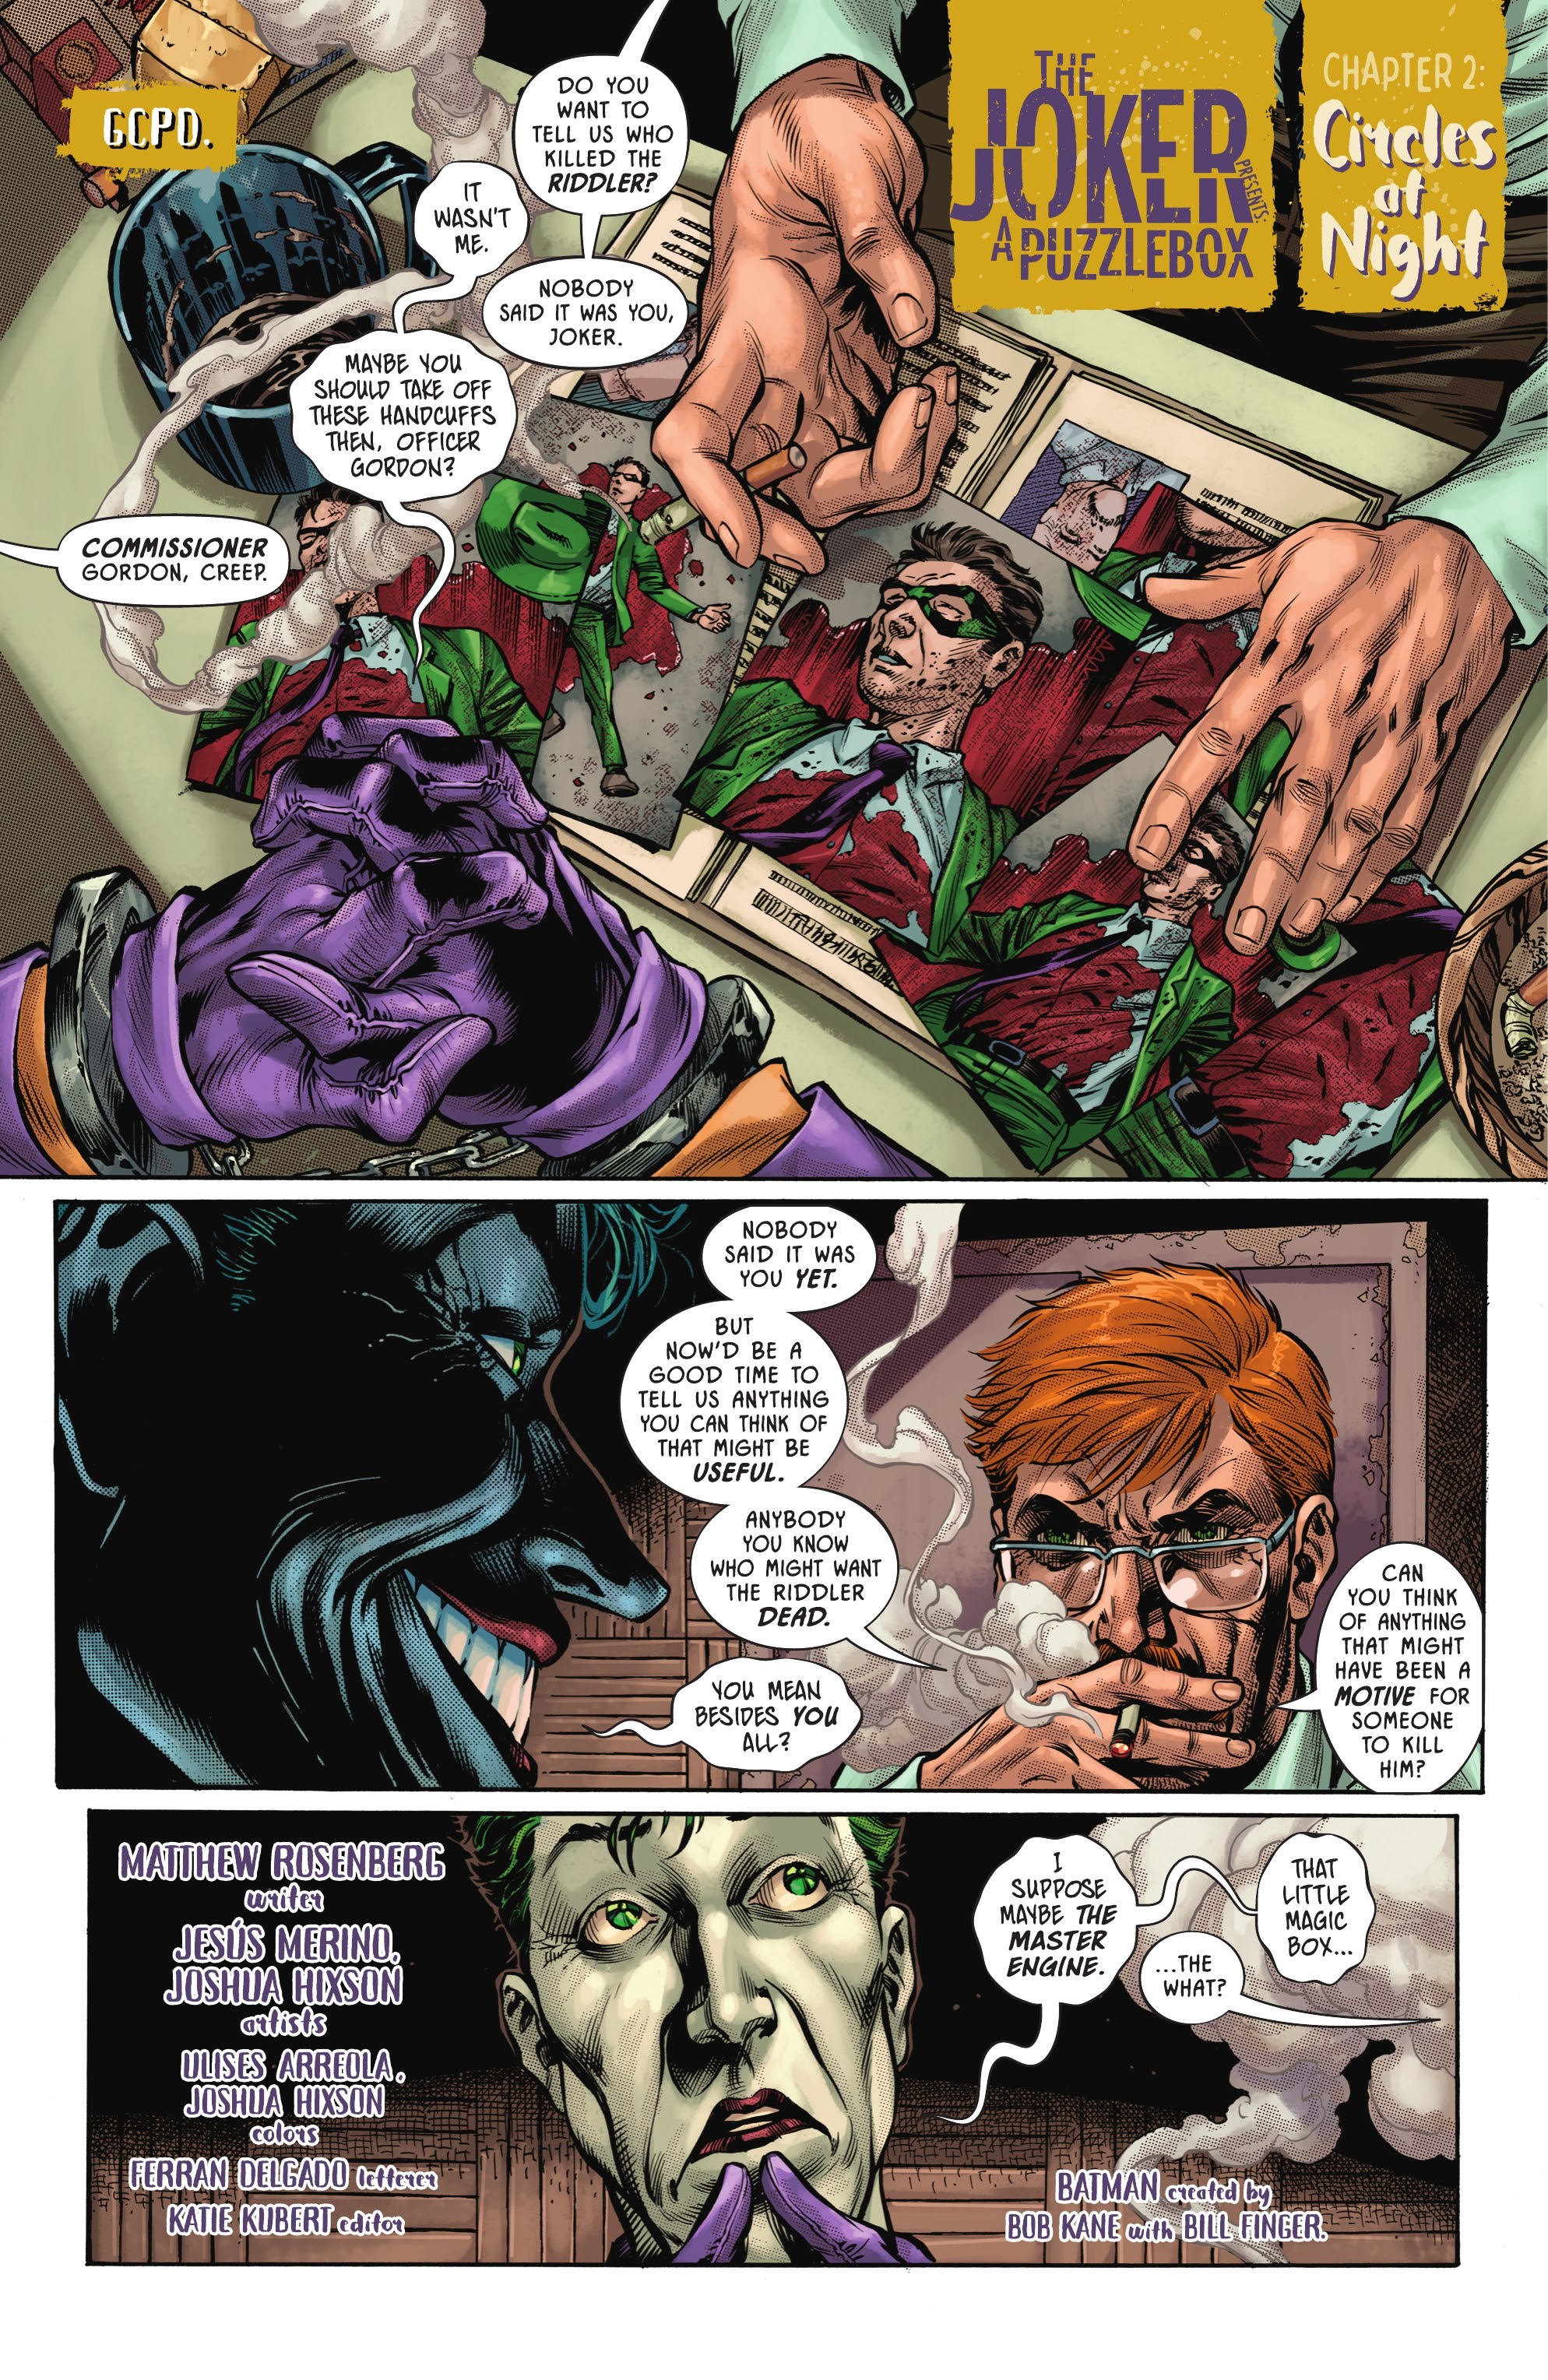 Read online The Joker Presents: A Puzzlebox comic -  Issue #2 - 2